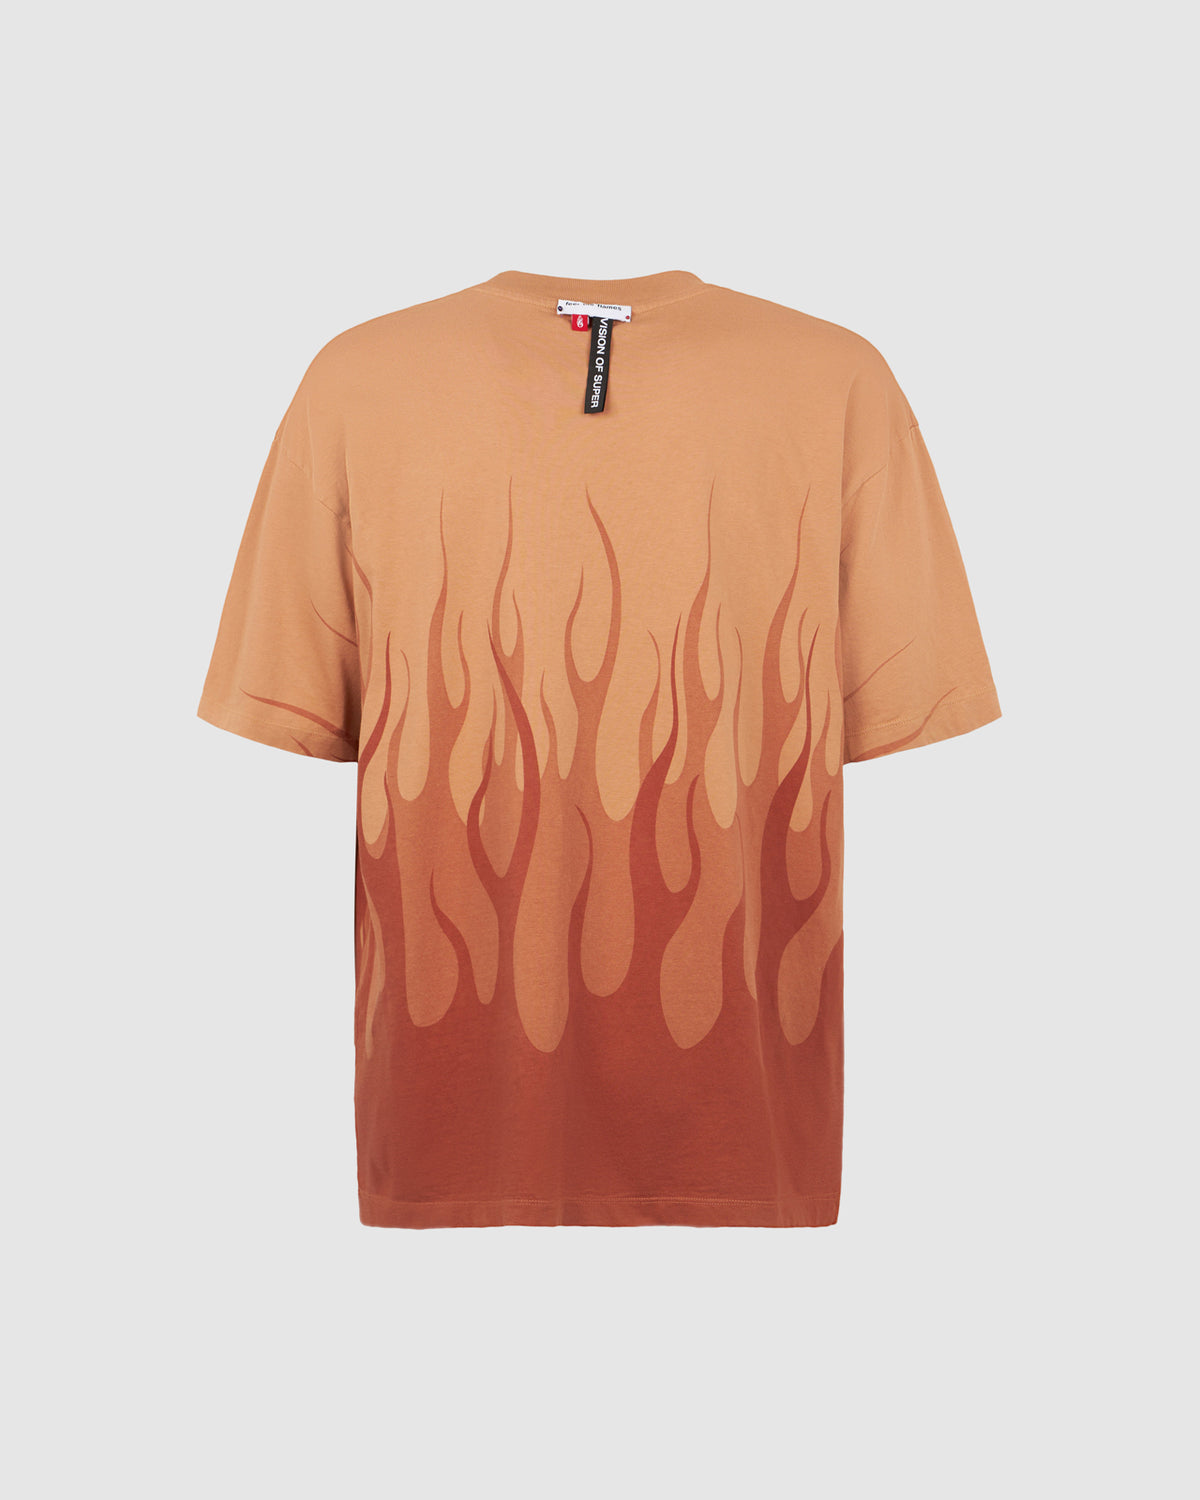 VISION OF SUPER TERRACOTTA T-SHIRT WITH DOUBLE FLAMES